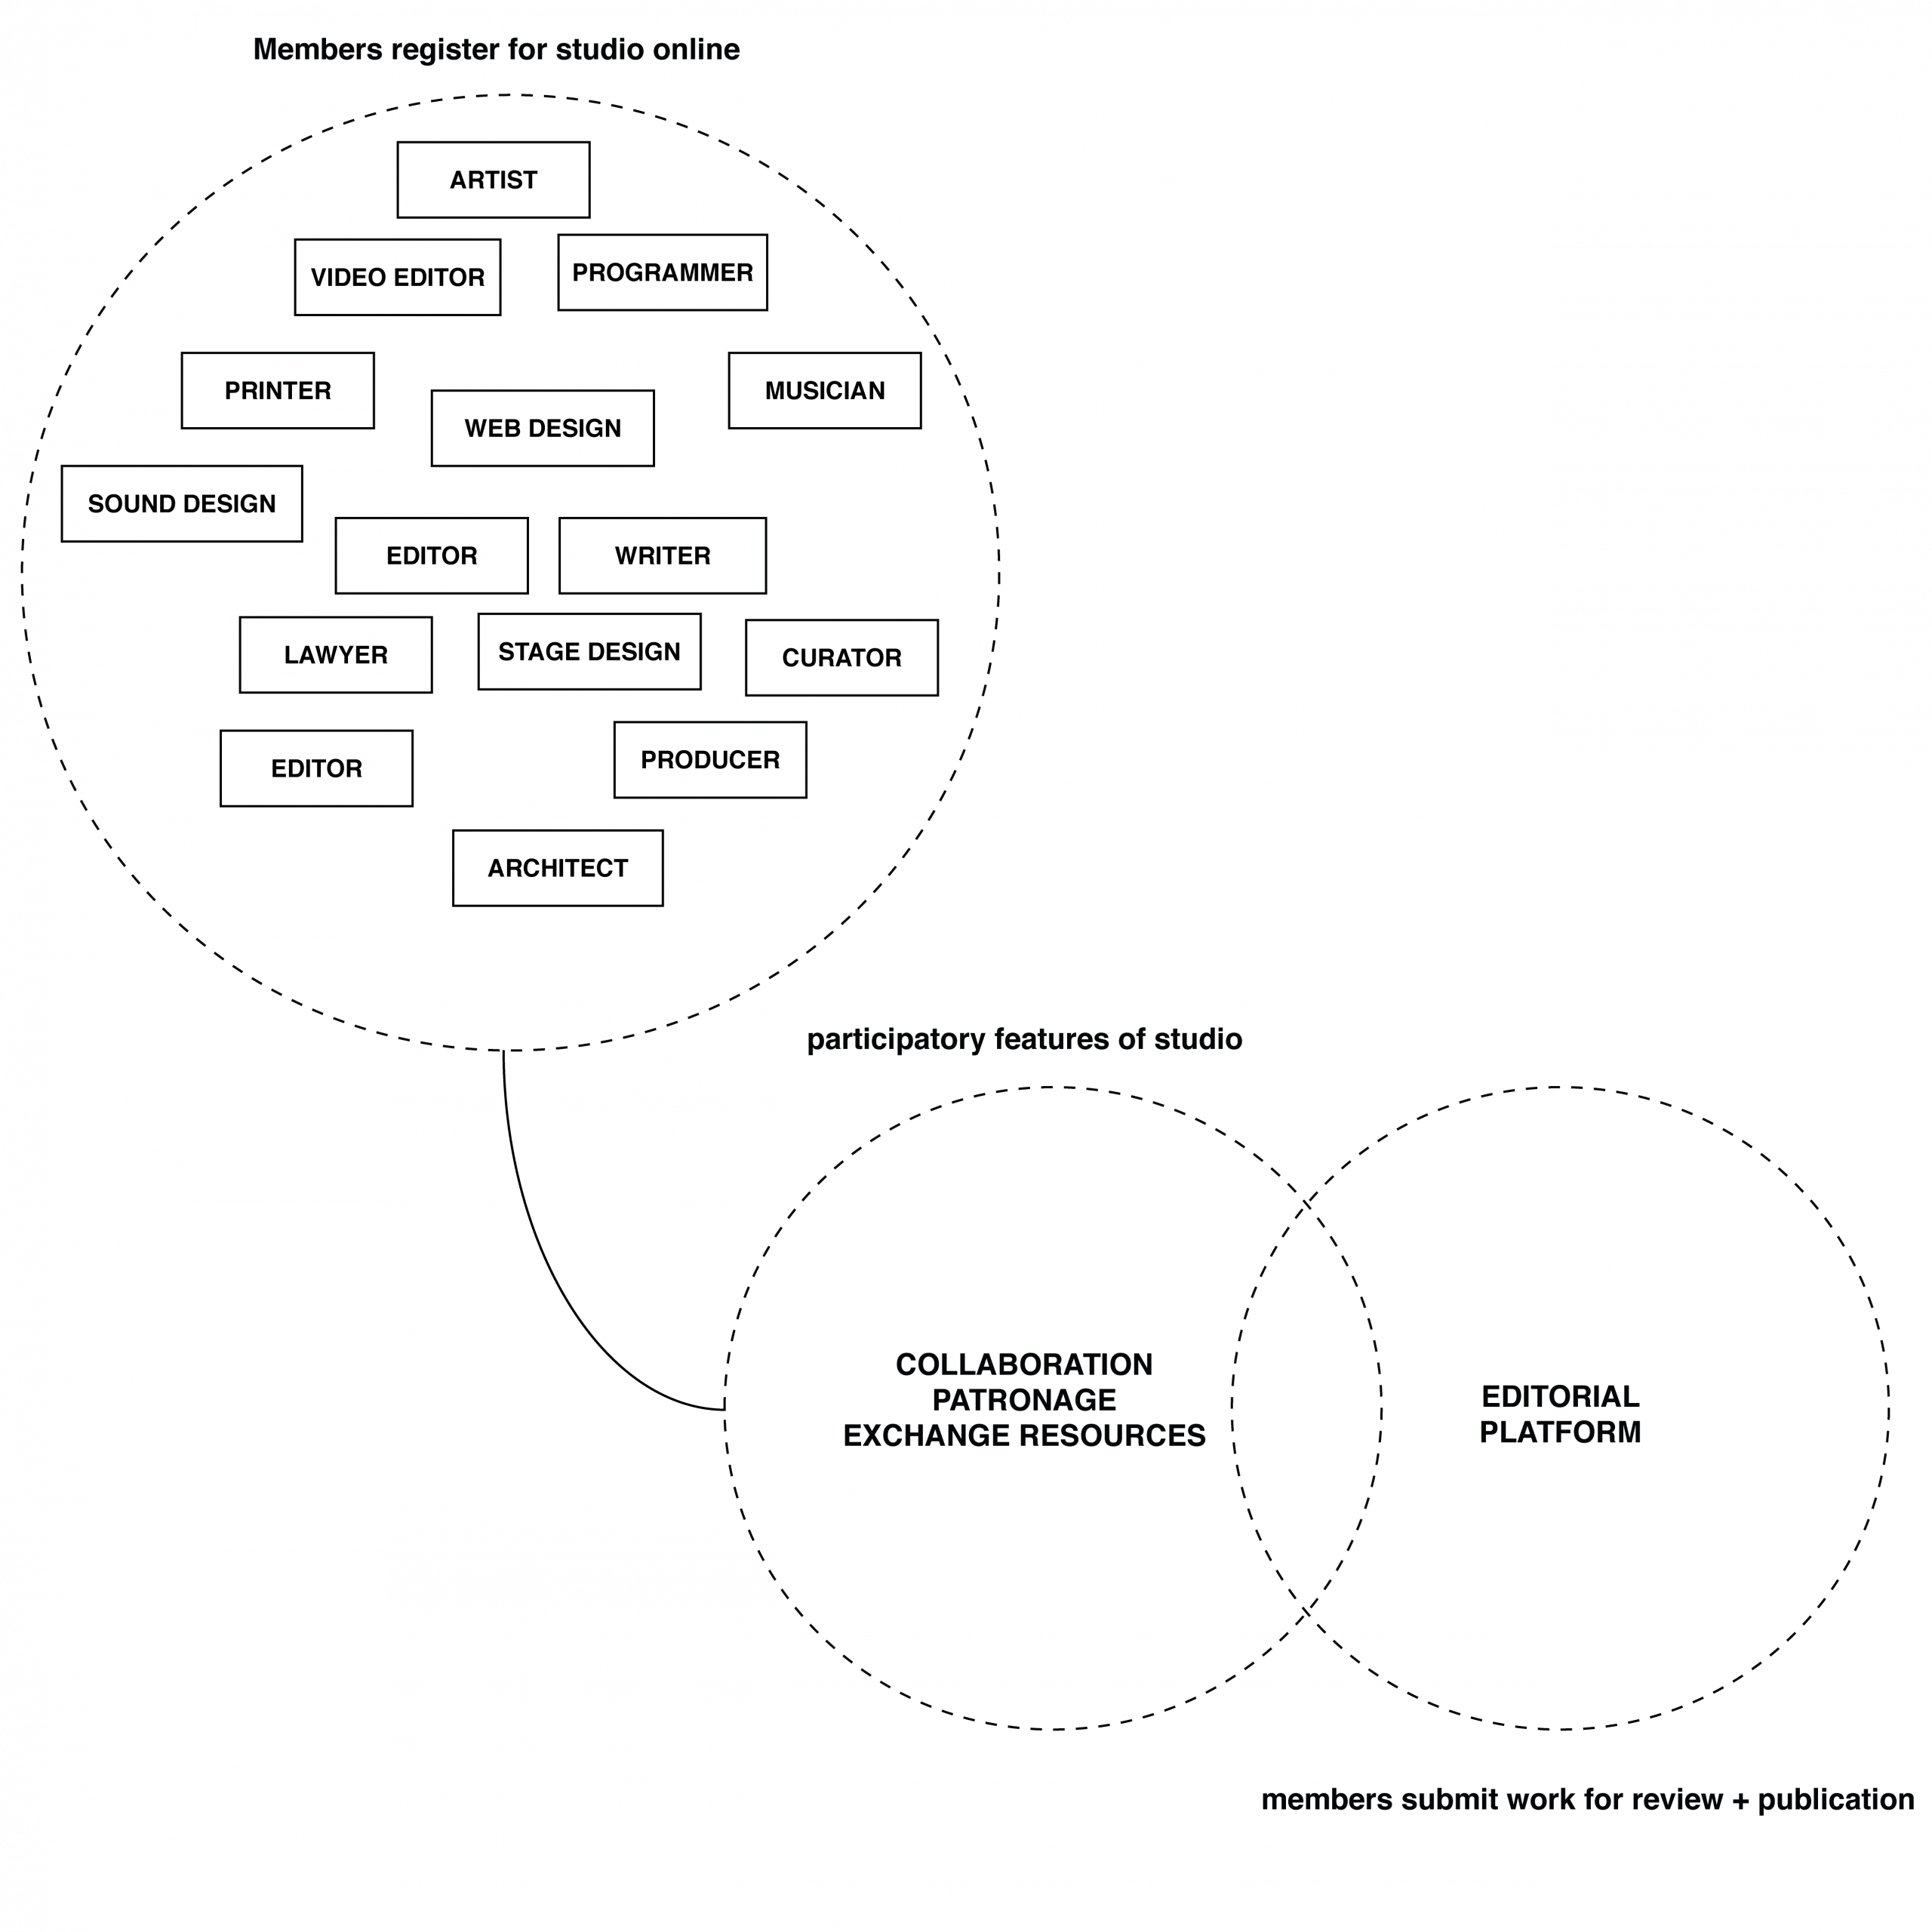 A diagram depicting the final model that Panchia, Whitaker and Cordeiro designed to reflect the studio’s structure and working relationship between participants in the studio. Image: Covalence Studios.